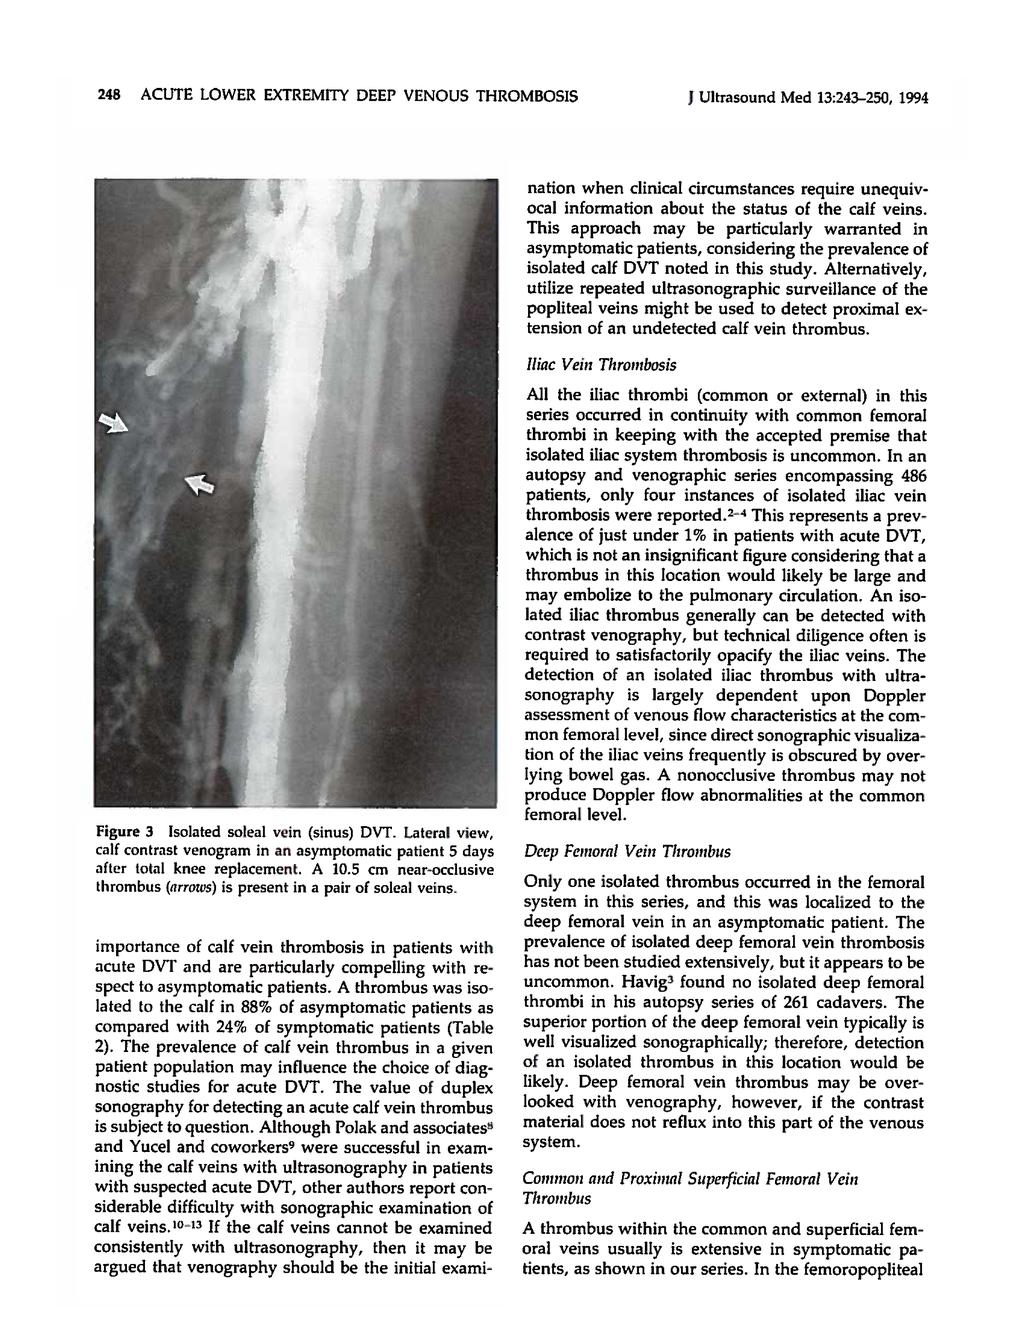 248 ACUTE LOWER EXTREMITY DEEP VENOUS THROMBOSIS J Ultrasound Med 13:243-250, 1994 nation when clinical circumstances require unequivocal information about the status of the calf veins.